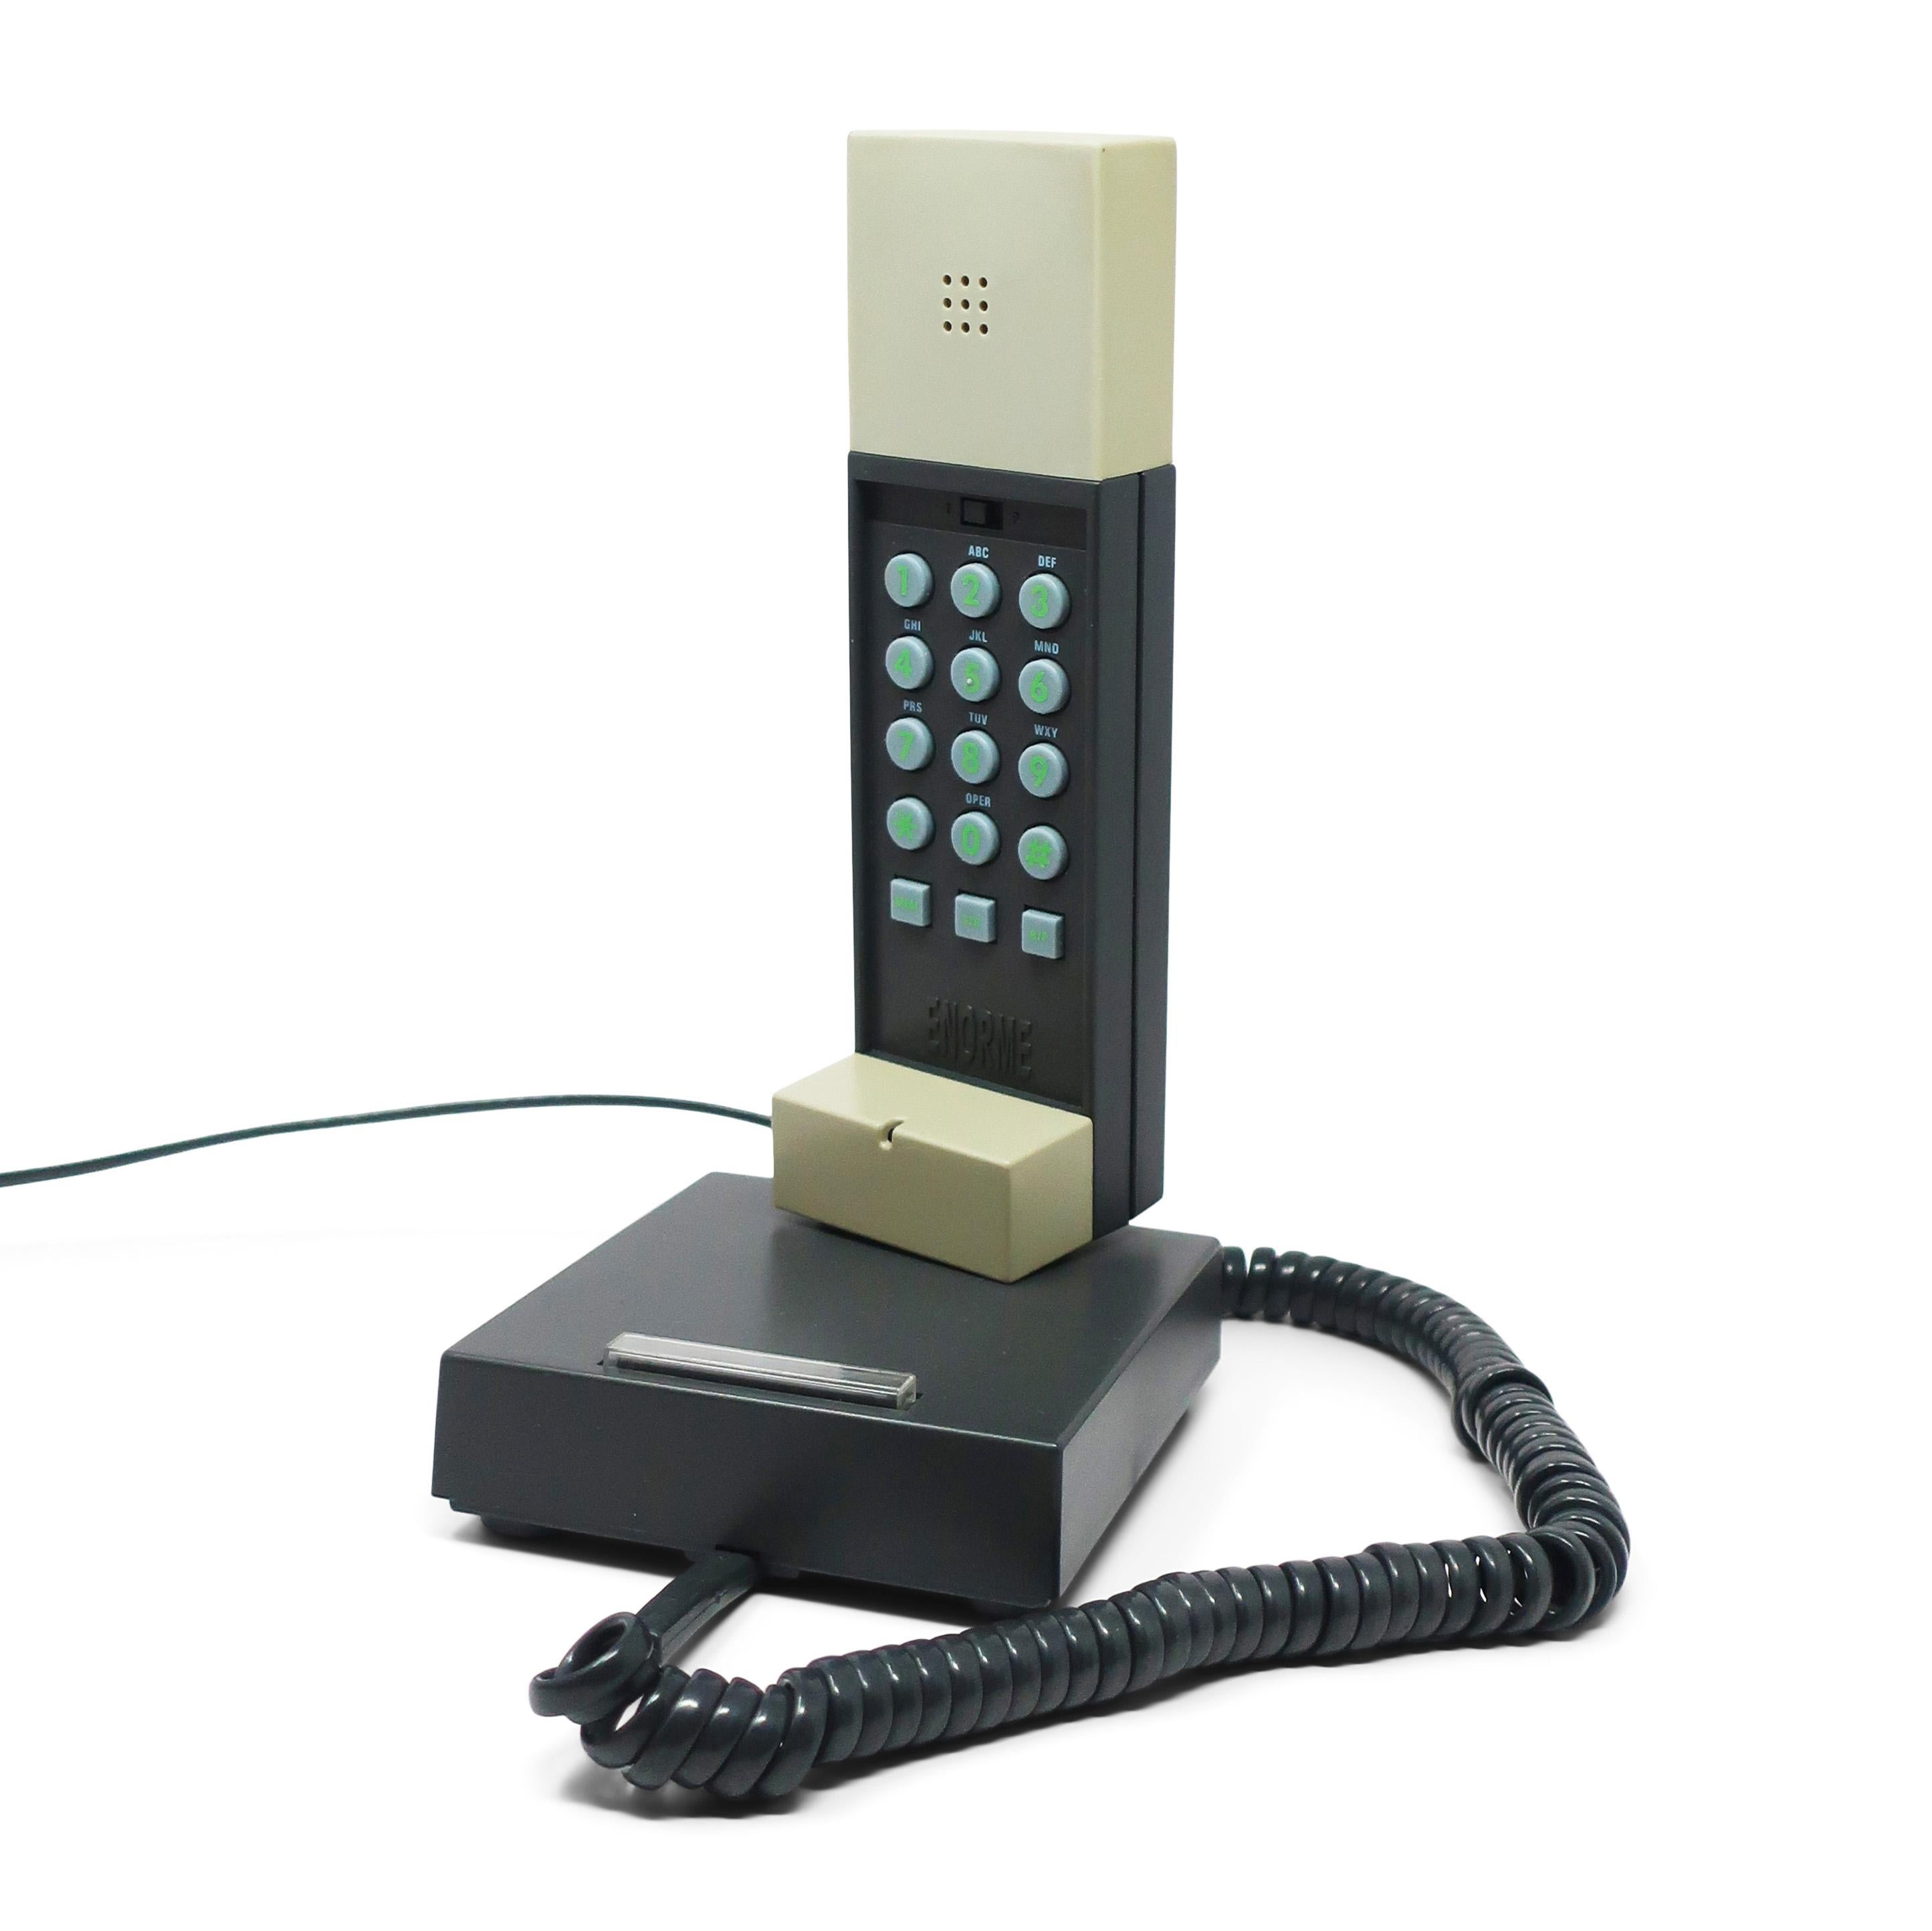 A perfectly postmodern telephone designed by the Memphis Milano master, Ettore Sottsass, and produced in 1986.  The Enorme phone was produced in another color way but this is the much rarer gray and black version.  The Enorme telephone was the